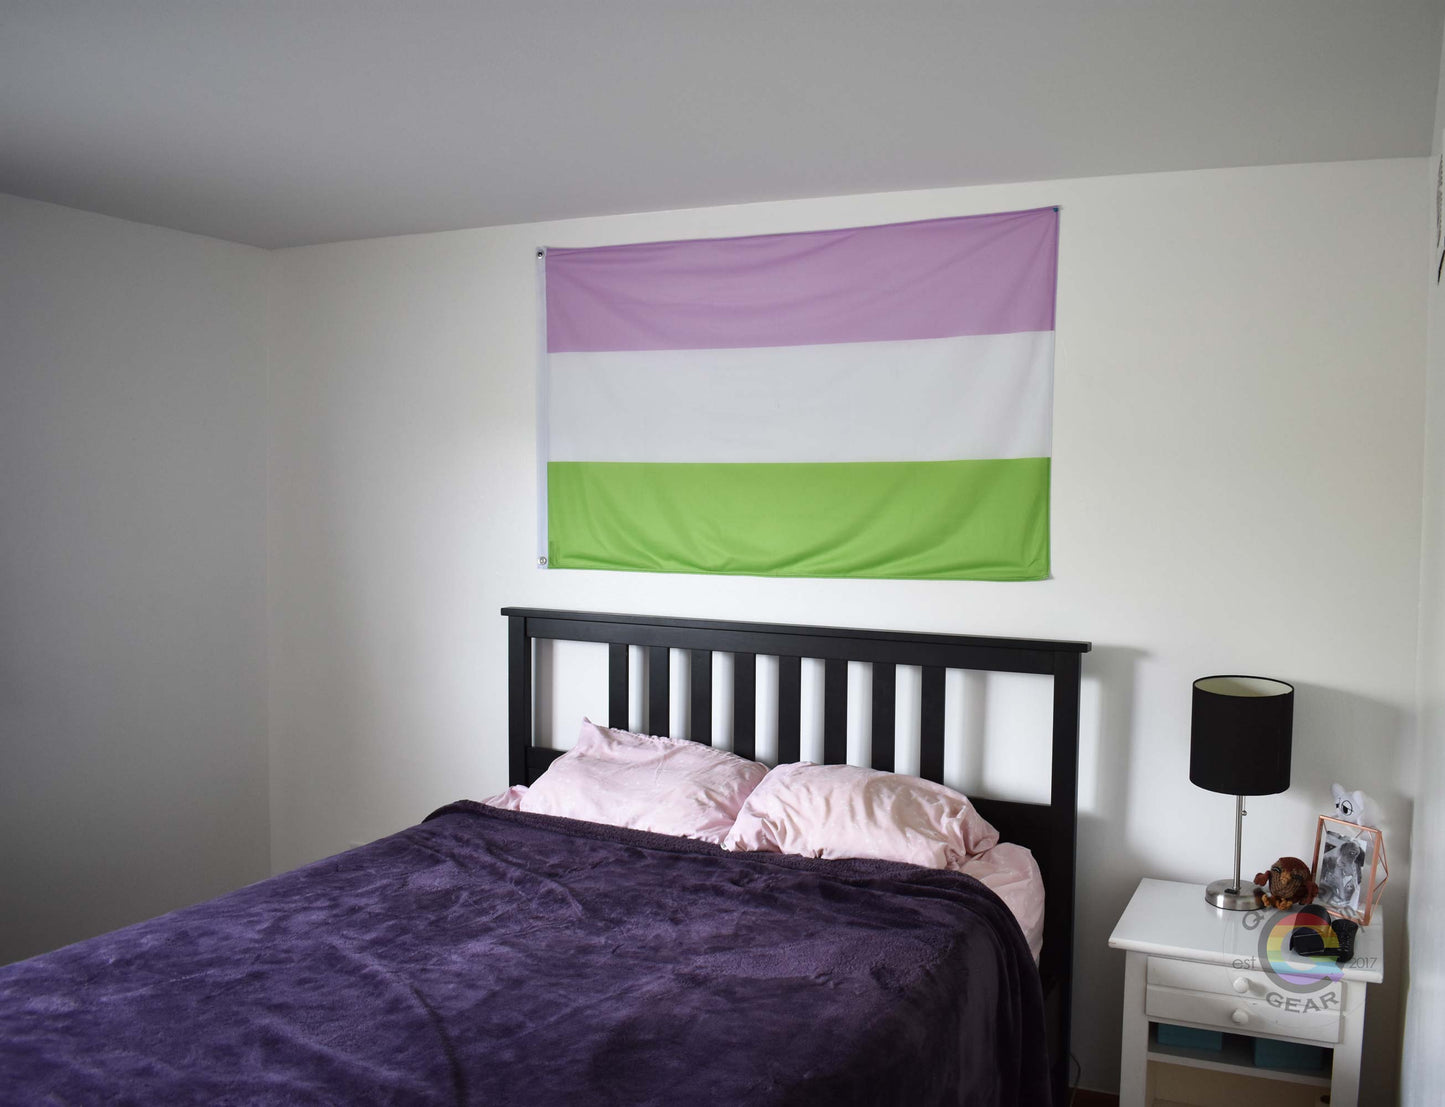 3’x5’ genderqueer pride flag hanging horizontally on the wall of a bedroom centered above a bed with a purple blanket